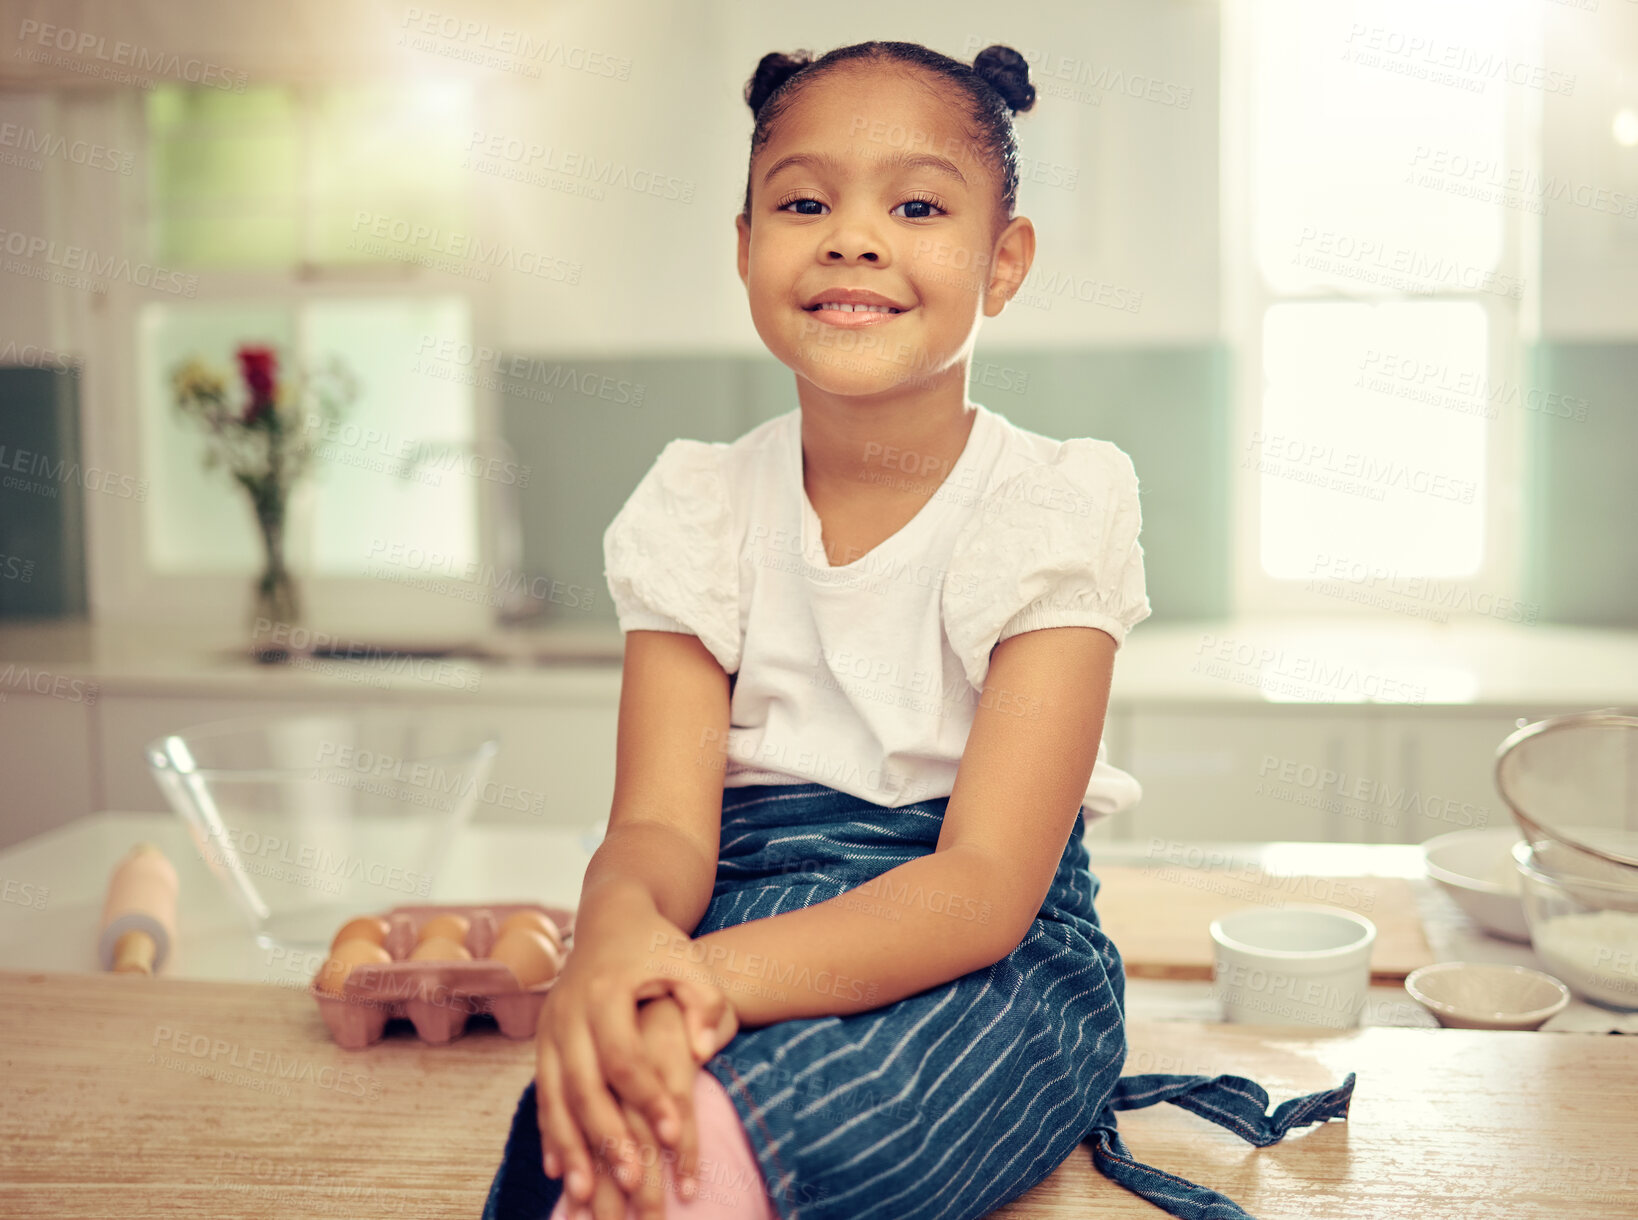 Buy stock photo Portrait of a cute young mixed race girl sitting on the kitchen counter smiling and wearing an apron looking thoughtful. Little innocent hispanic girl smiling and sitting alone after baking in the kitchen at home. Baking is one of her hobbies and she daydreams of it everyday